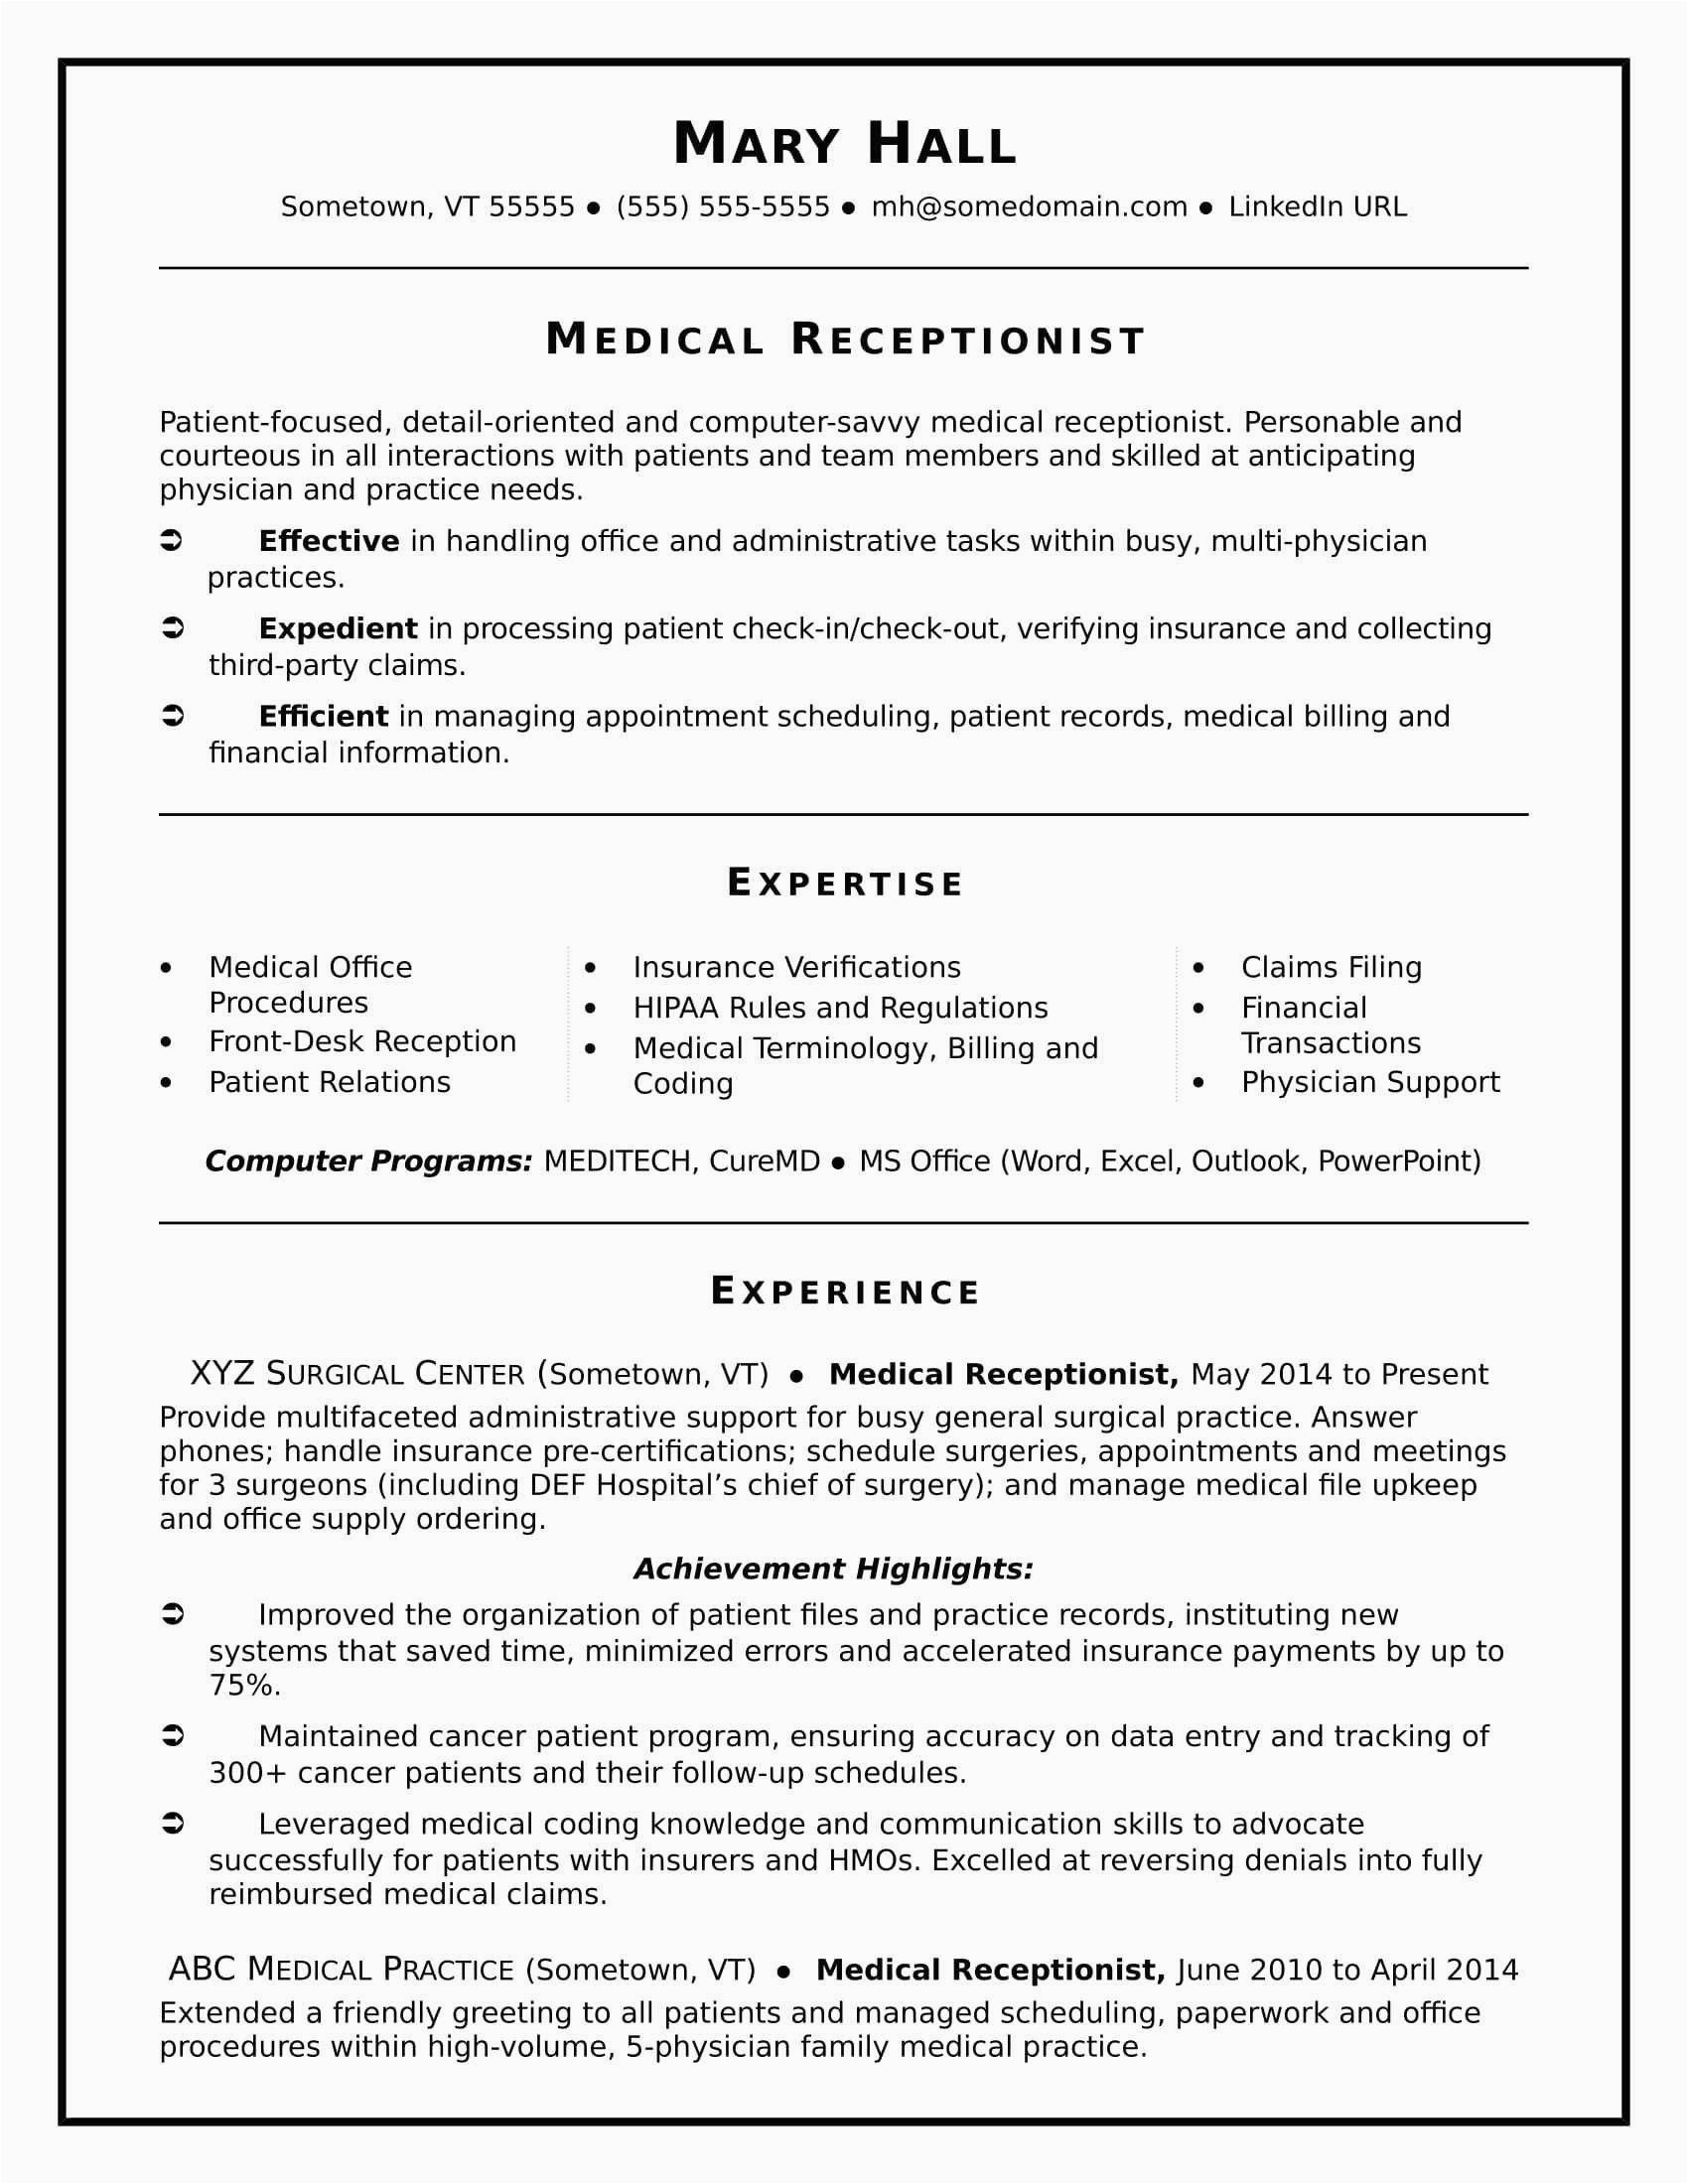 Free Medical Billing and Coding Resume Templates Medical Billing and Coding Sample Test